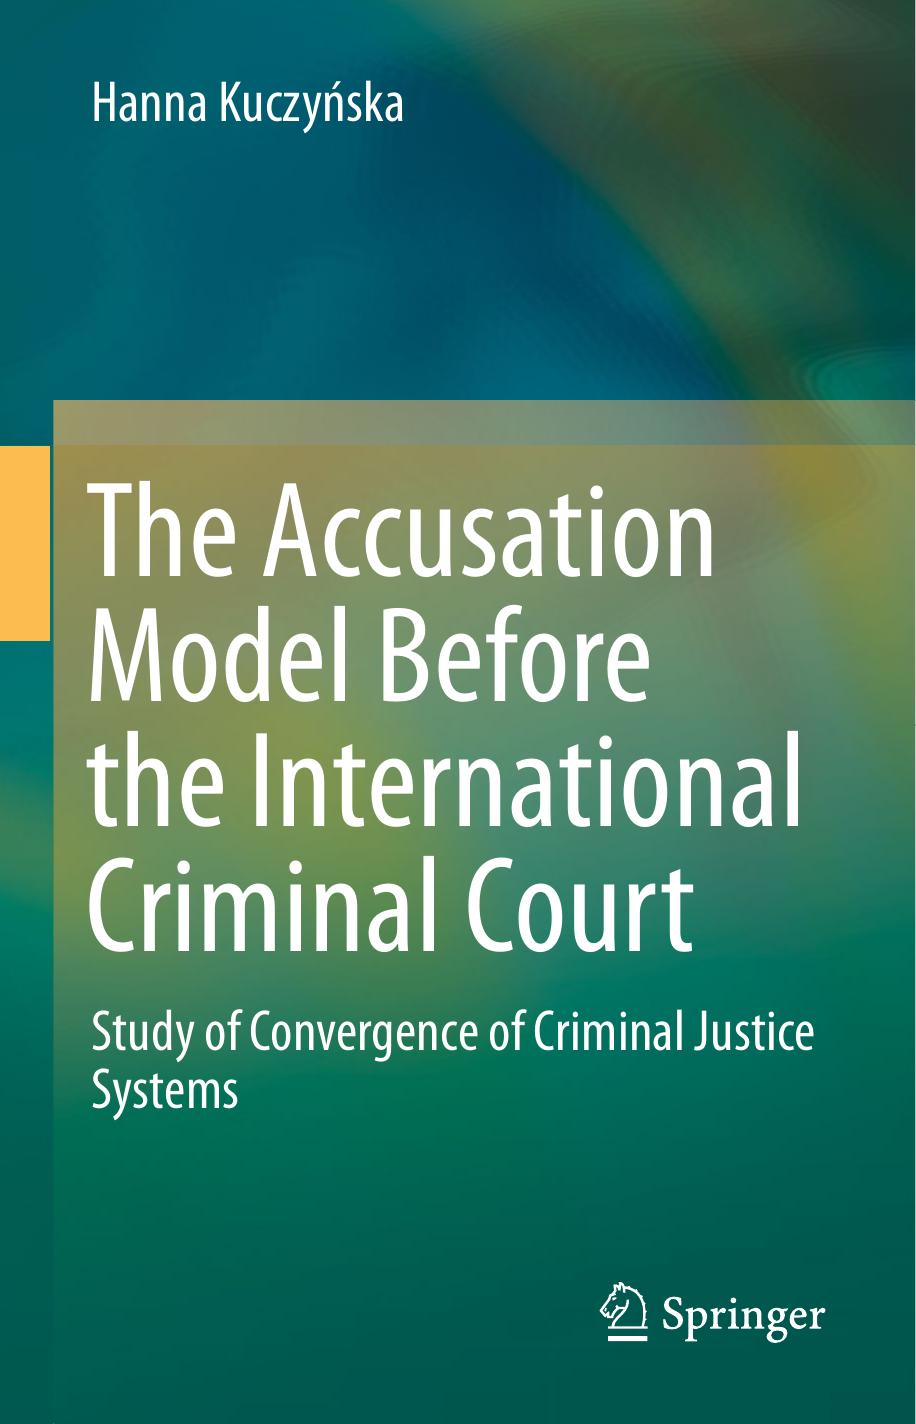 The Accusation Model Before the International Criminal Court Study of Convergence  2014